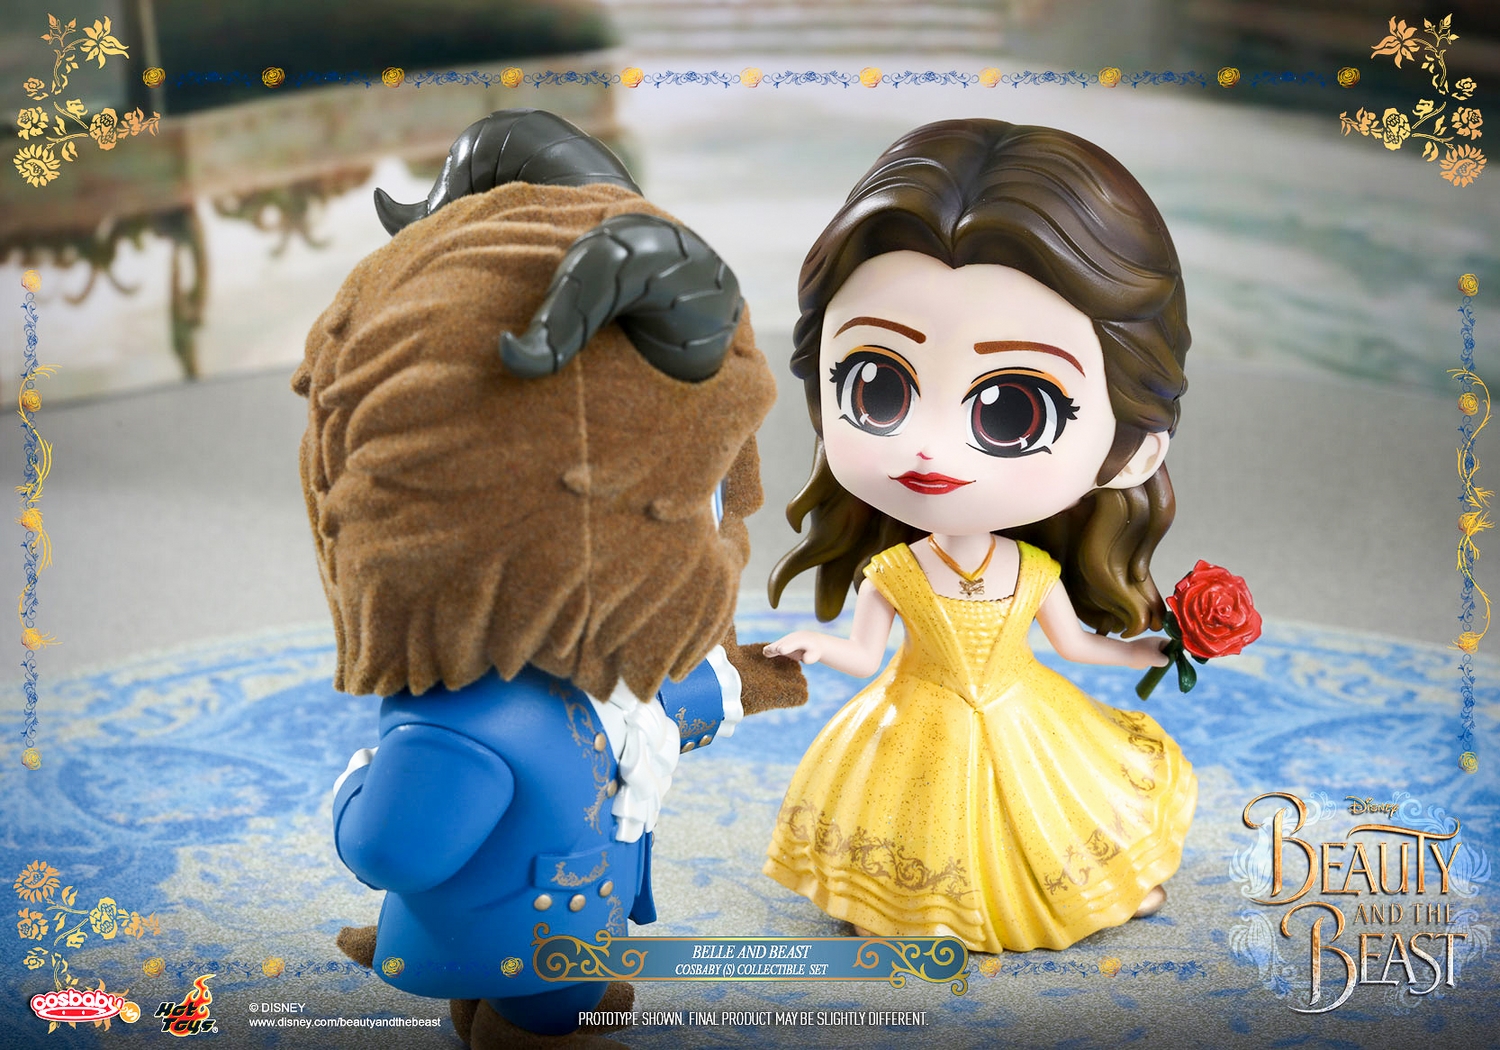 Hot-Toys-COSB352-353-Beauty-and-the-Beast-Cosbaby-006.jpg